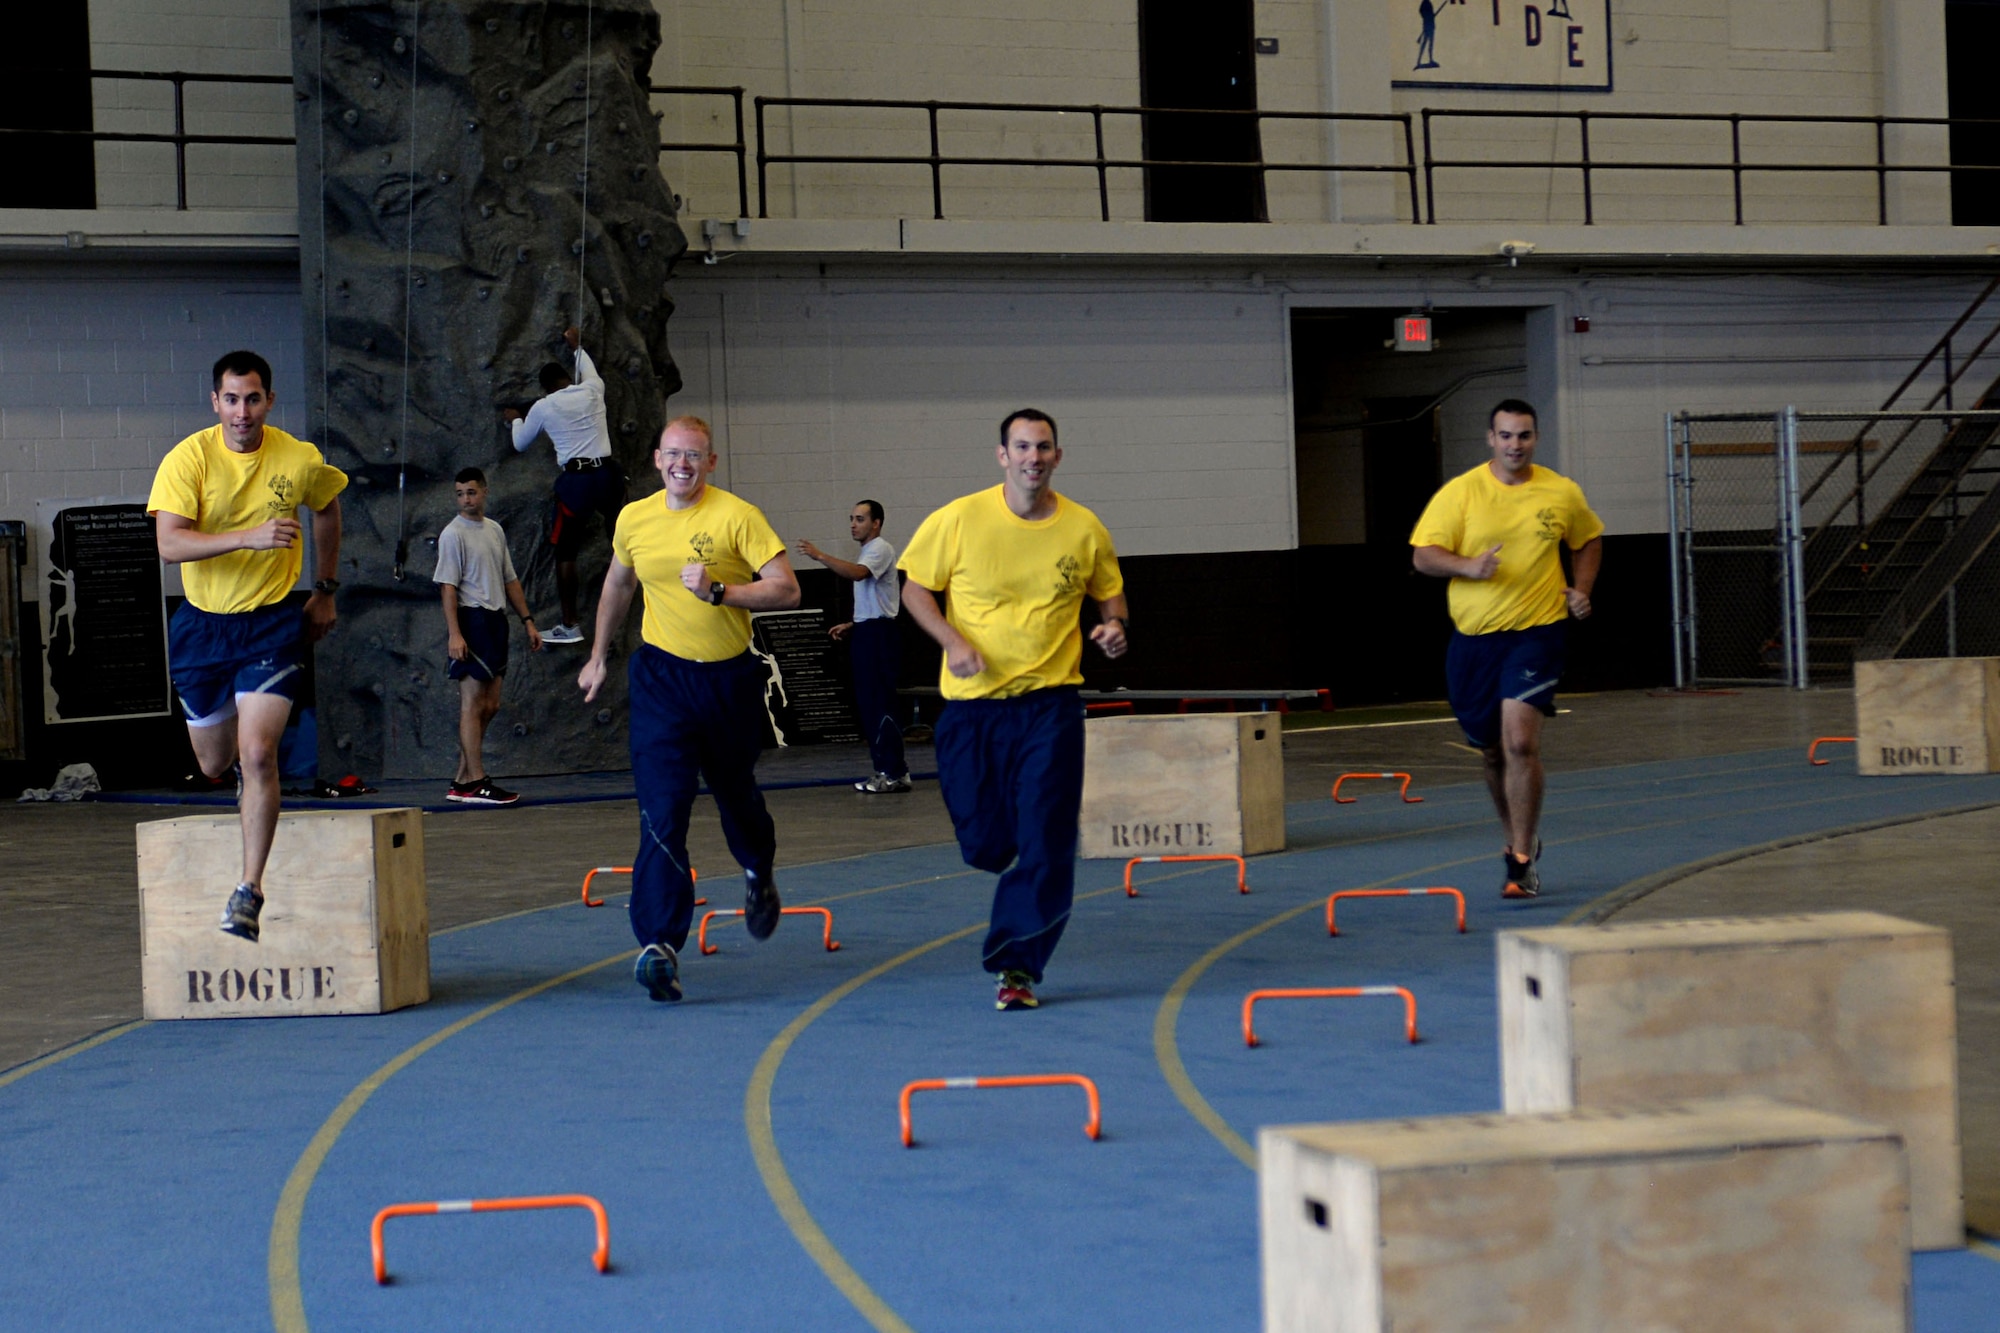 Airmen from the 37th Bomb Squadron participate in an obstacle course during a Comprehensive Airman Fitness day in the Pride Hangar at Ellsworth Air Force Base, S.D., Sept. 30, 2014. Teams of four Airmen participated in the course which consisted of 12 different events, including a sandbag carry, low crawls and a rock-wall climb. (U.S. Air Force photo by Airman 1st Class Rebecca Imwalle/Released)